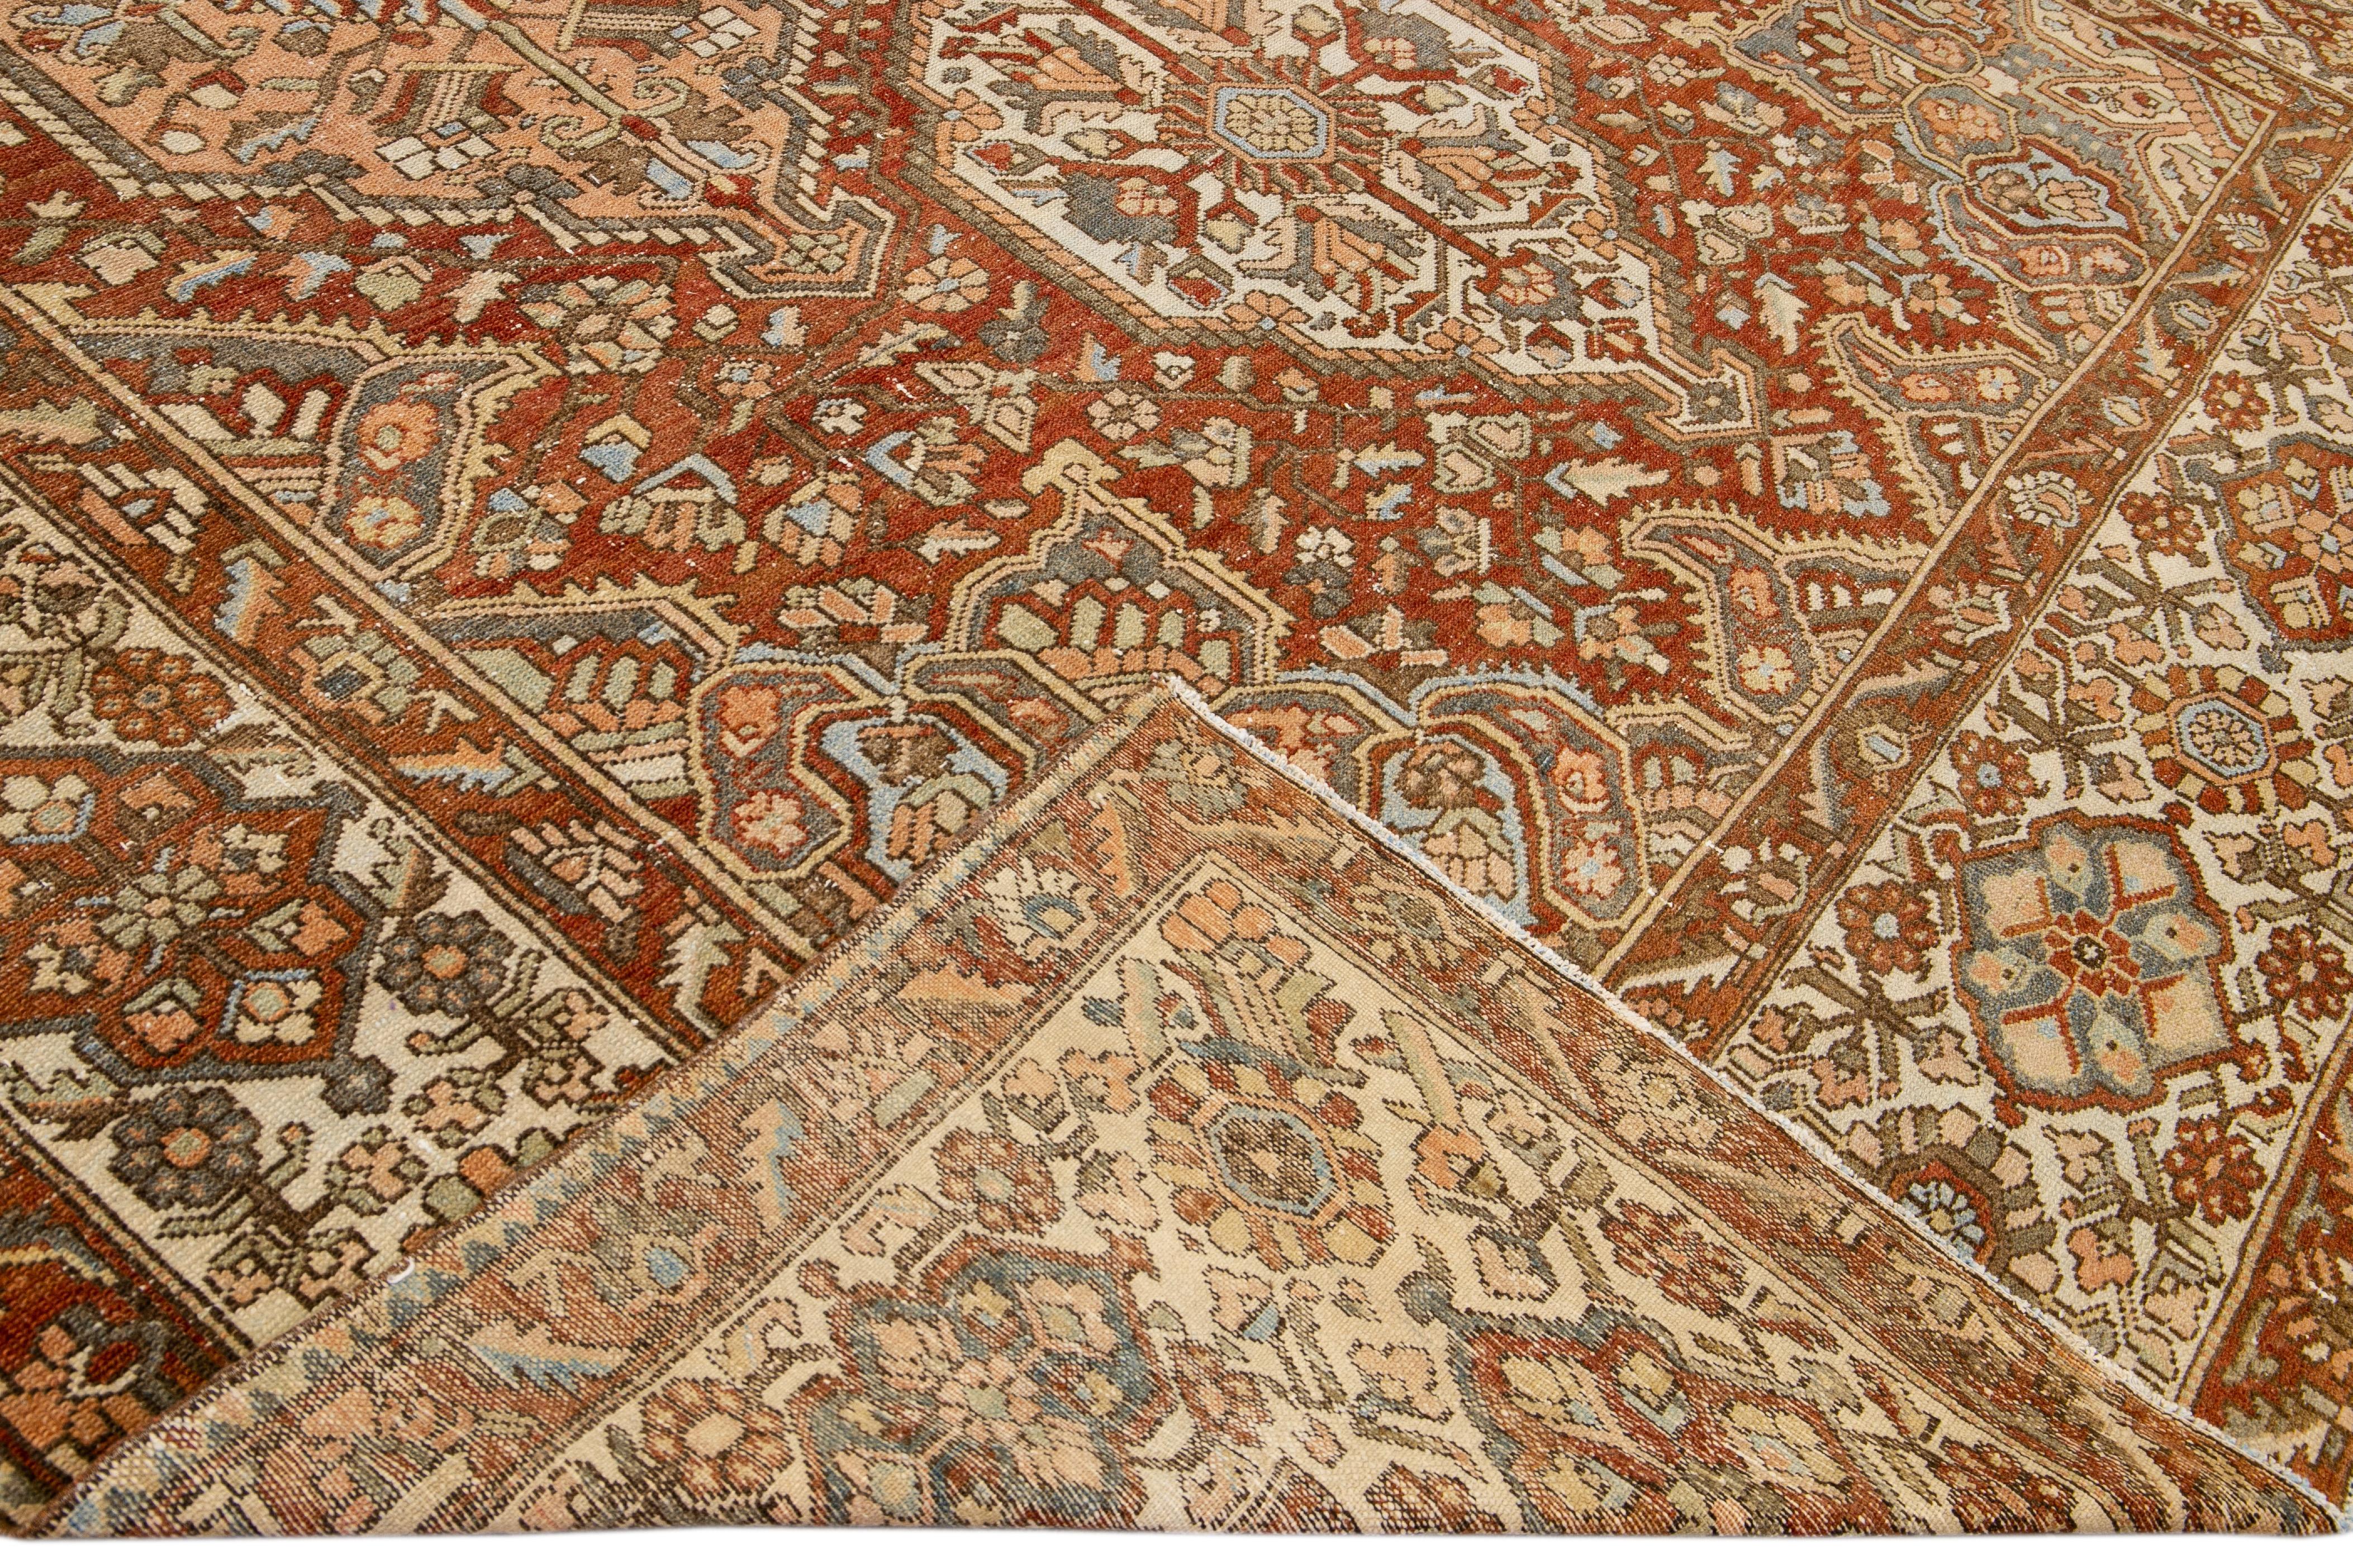 Beautiful antique Bakhtiari hand-knotted wool rug with a rust field. This piece rug has a beige frame, blue, peach, and brown accents on a gorgeous Classic Multi Medallion floral design

This rug measures 11'8